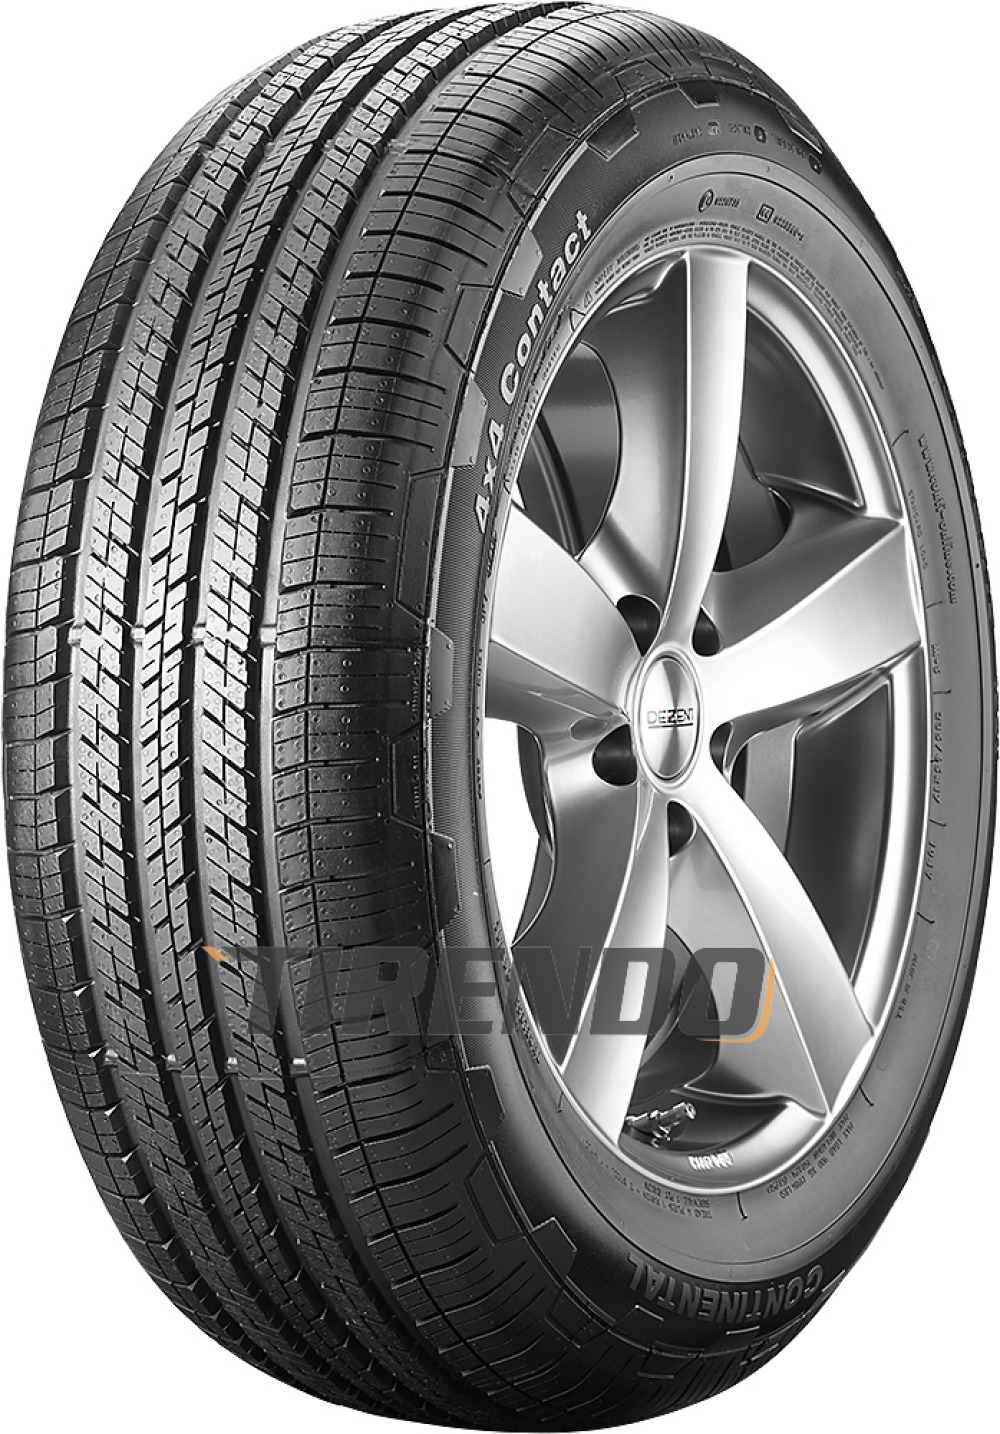 Image of Continental 4X4 Contact ( 255/50 R19 107V XL )